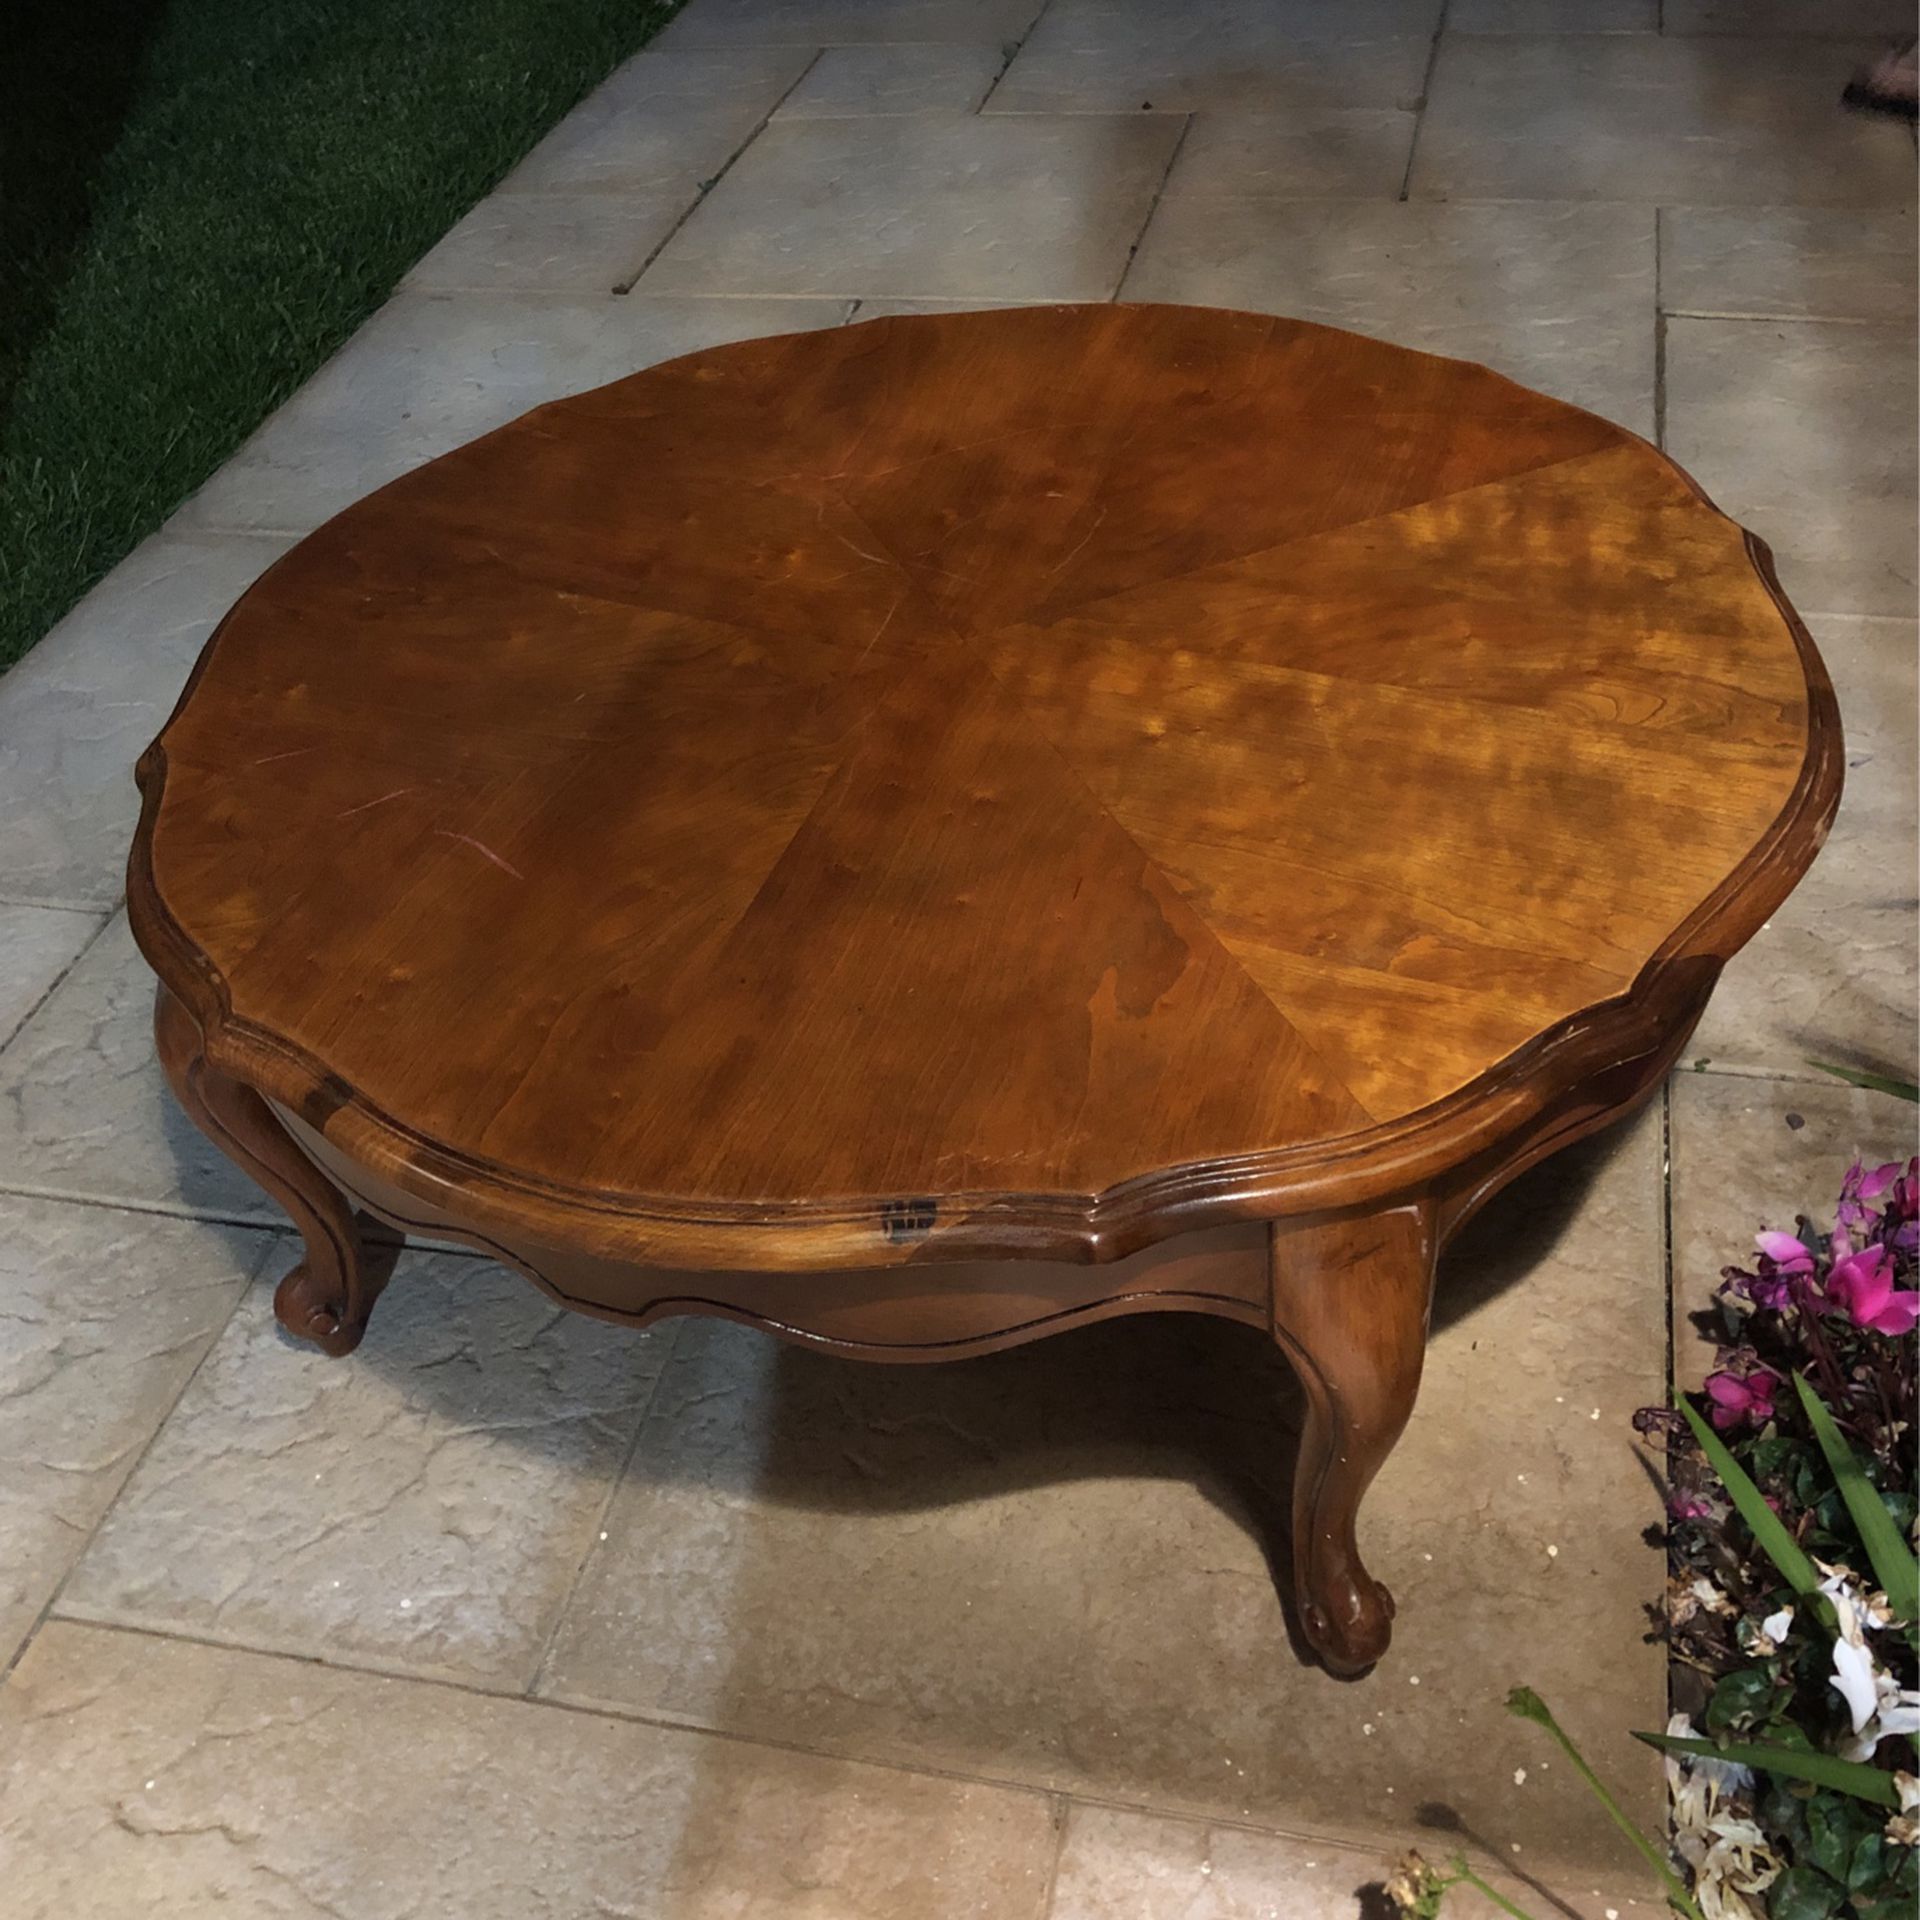 BEAUTIFUL ROUND TABLE